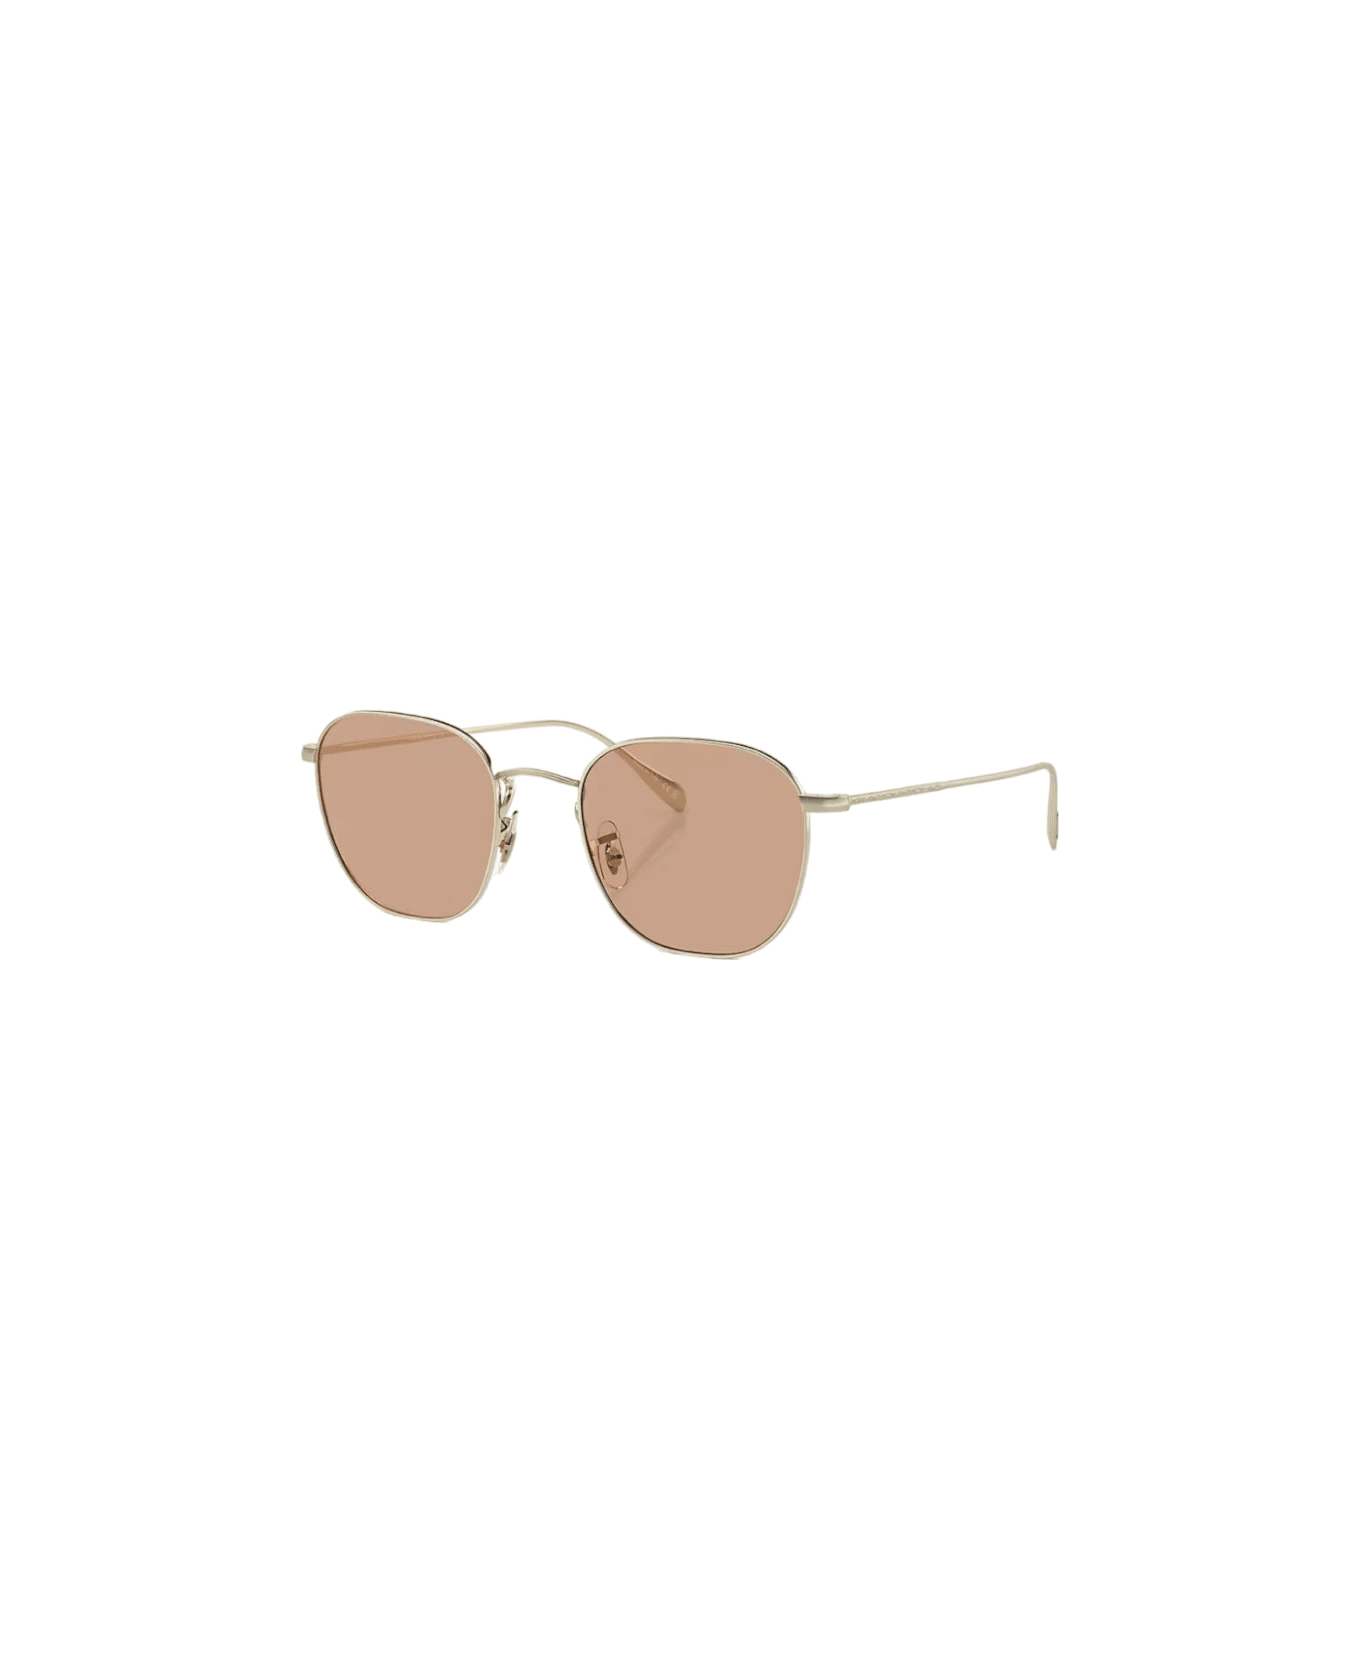 Oliver Peoples Clyne - Gold Sunglasses サングラス